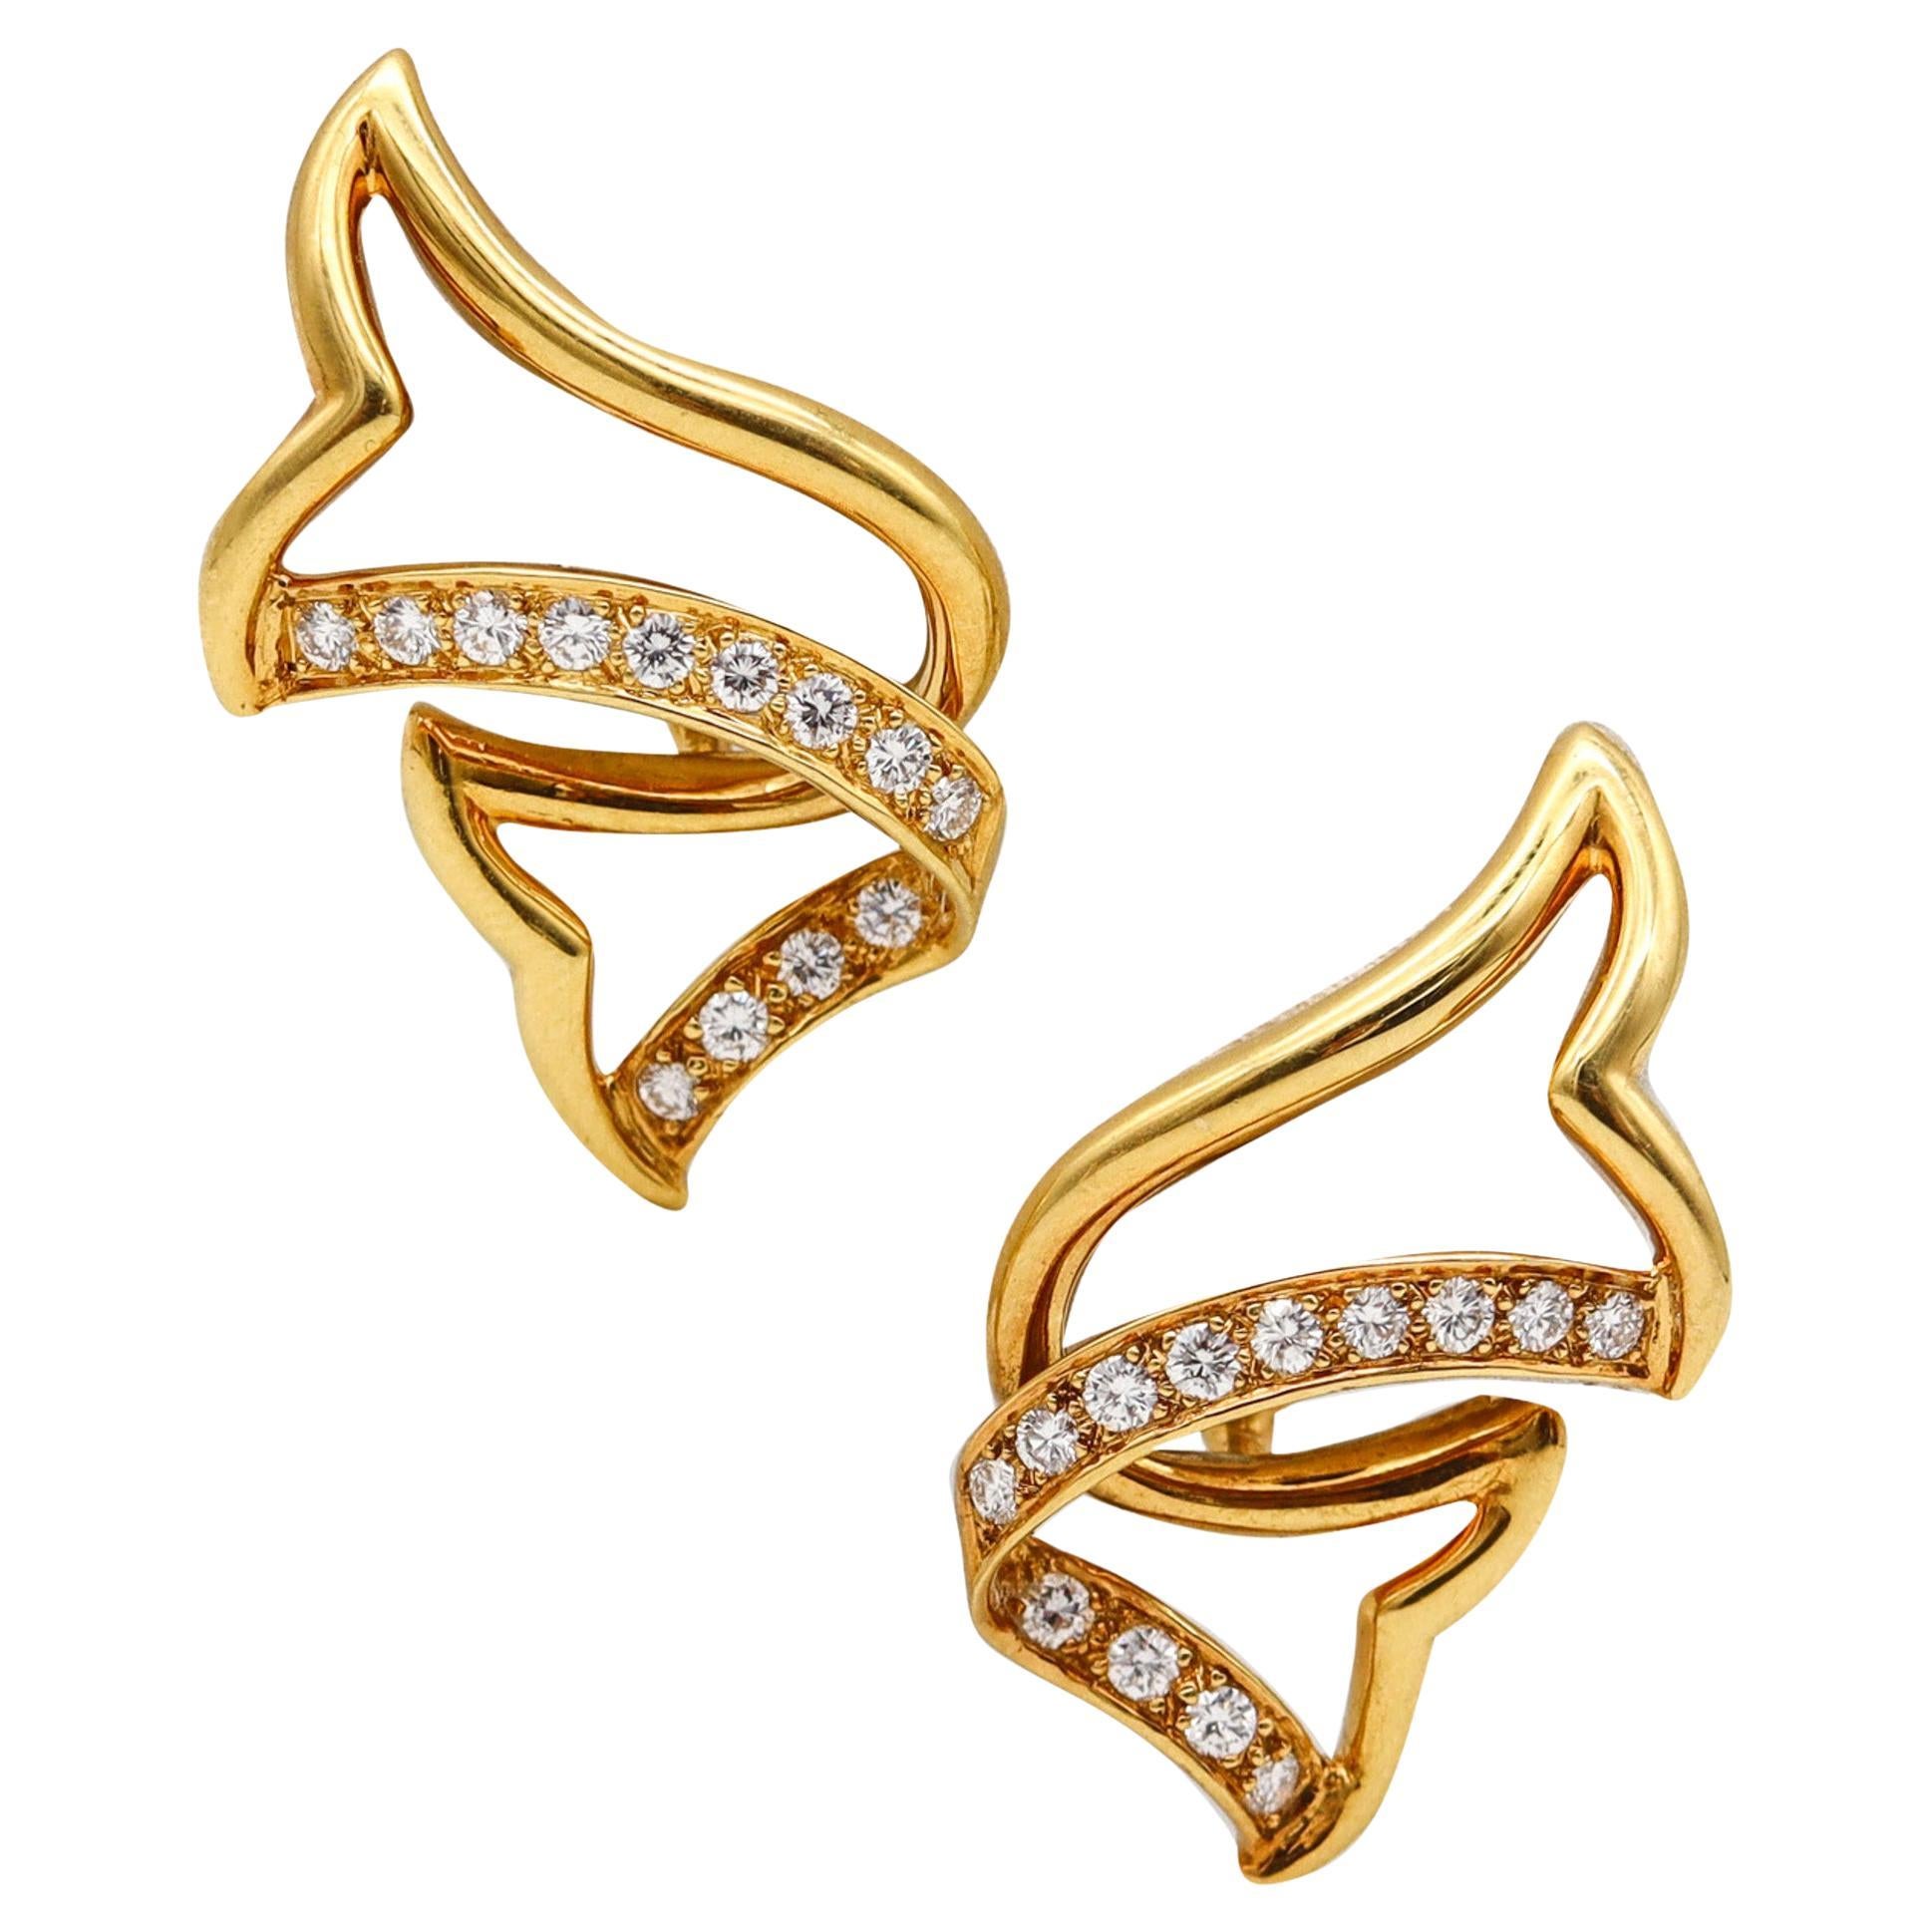 Sonia Bitton Sculptural Free Form Earrings In 18Kt Gold With 1.58 Ctw Diamonds